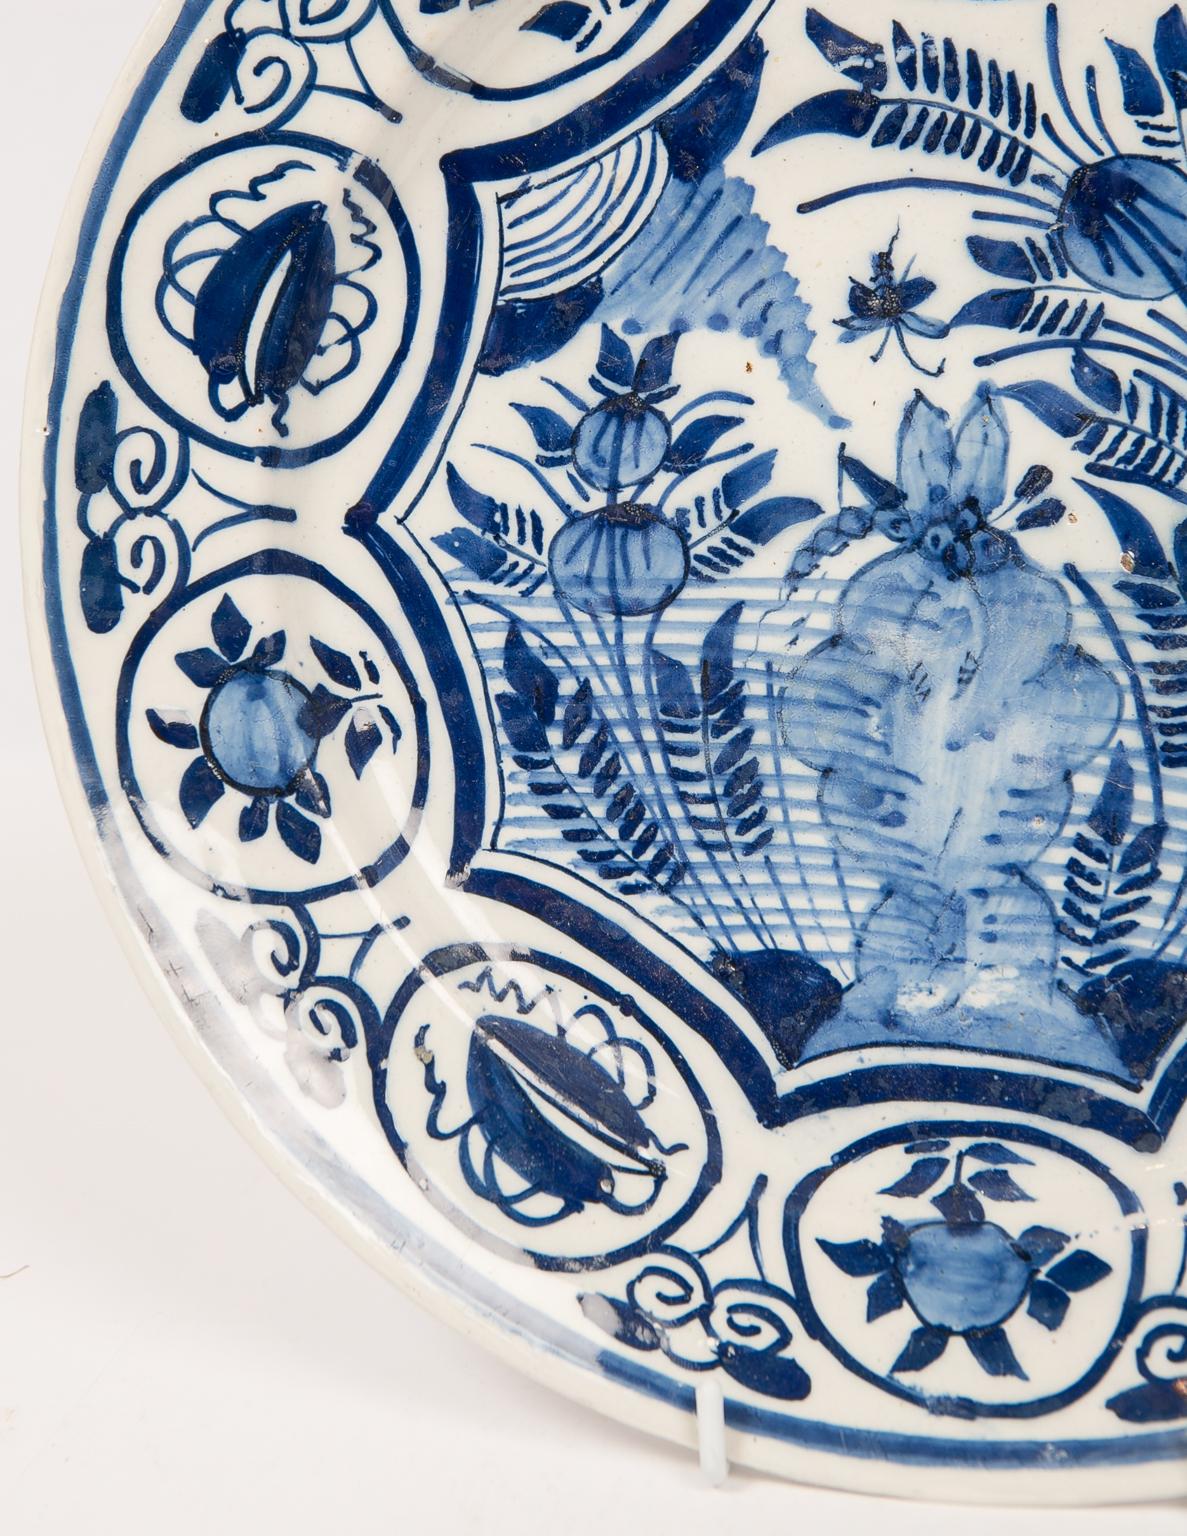 Ten Blue and White Delft chargers hand-painted and dating from the mid-18th century to circa 1800.
Each charger is hand painted in a medium tone of cobalt blue. This medium tone of cobalt coloring allows the chargers to work well together as a